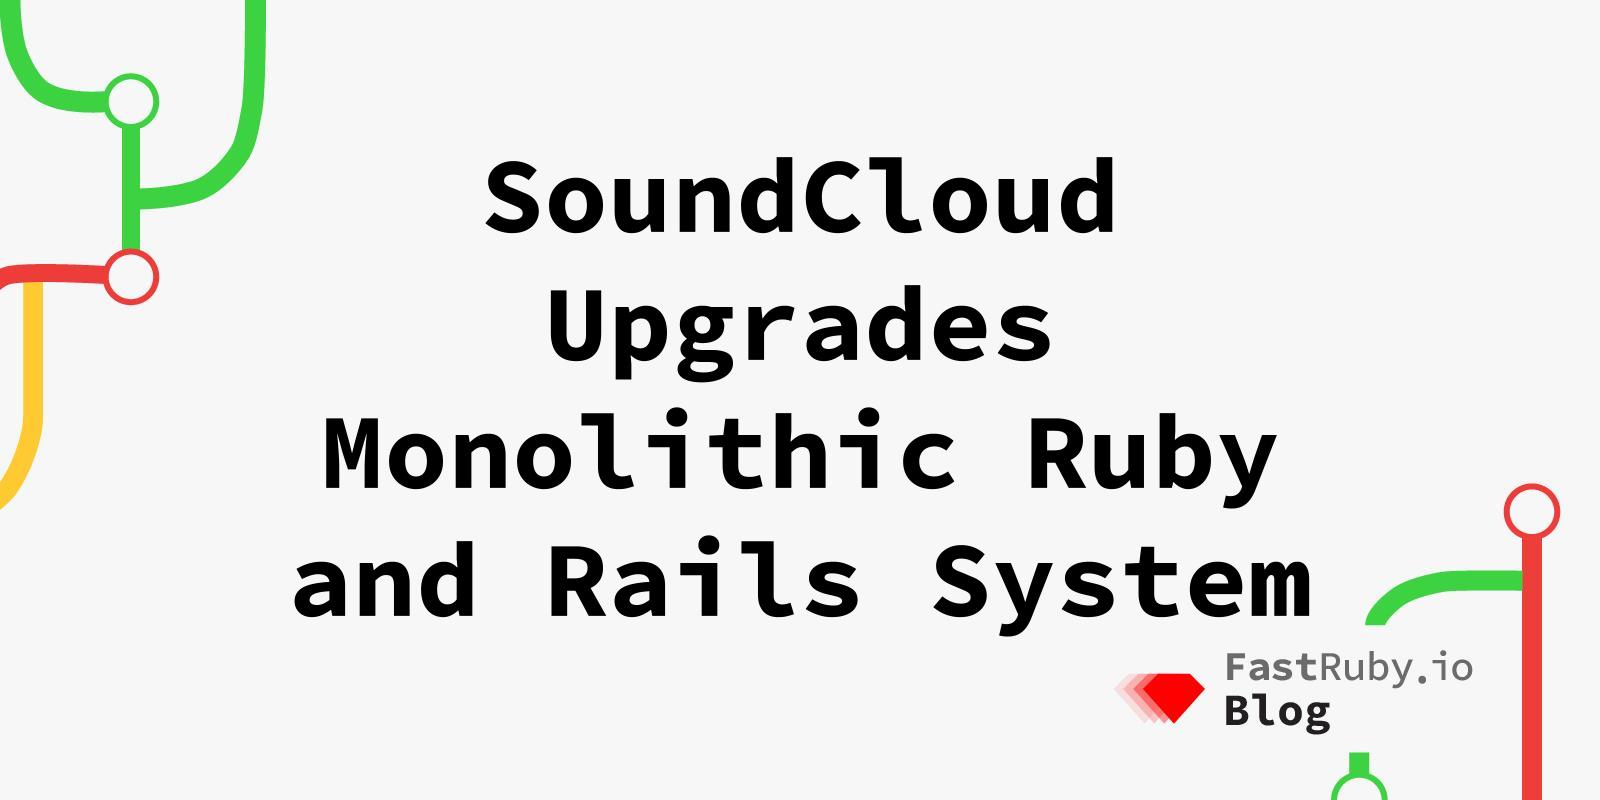 SoundCloud Upgrades Monolithic Ruby and Rails System, Improves Security and Performance